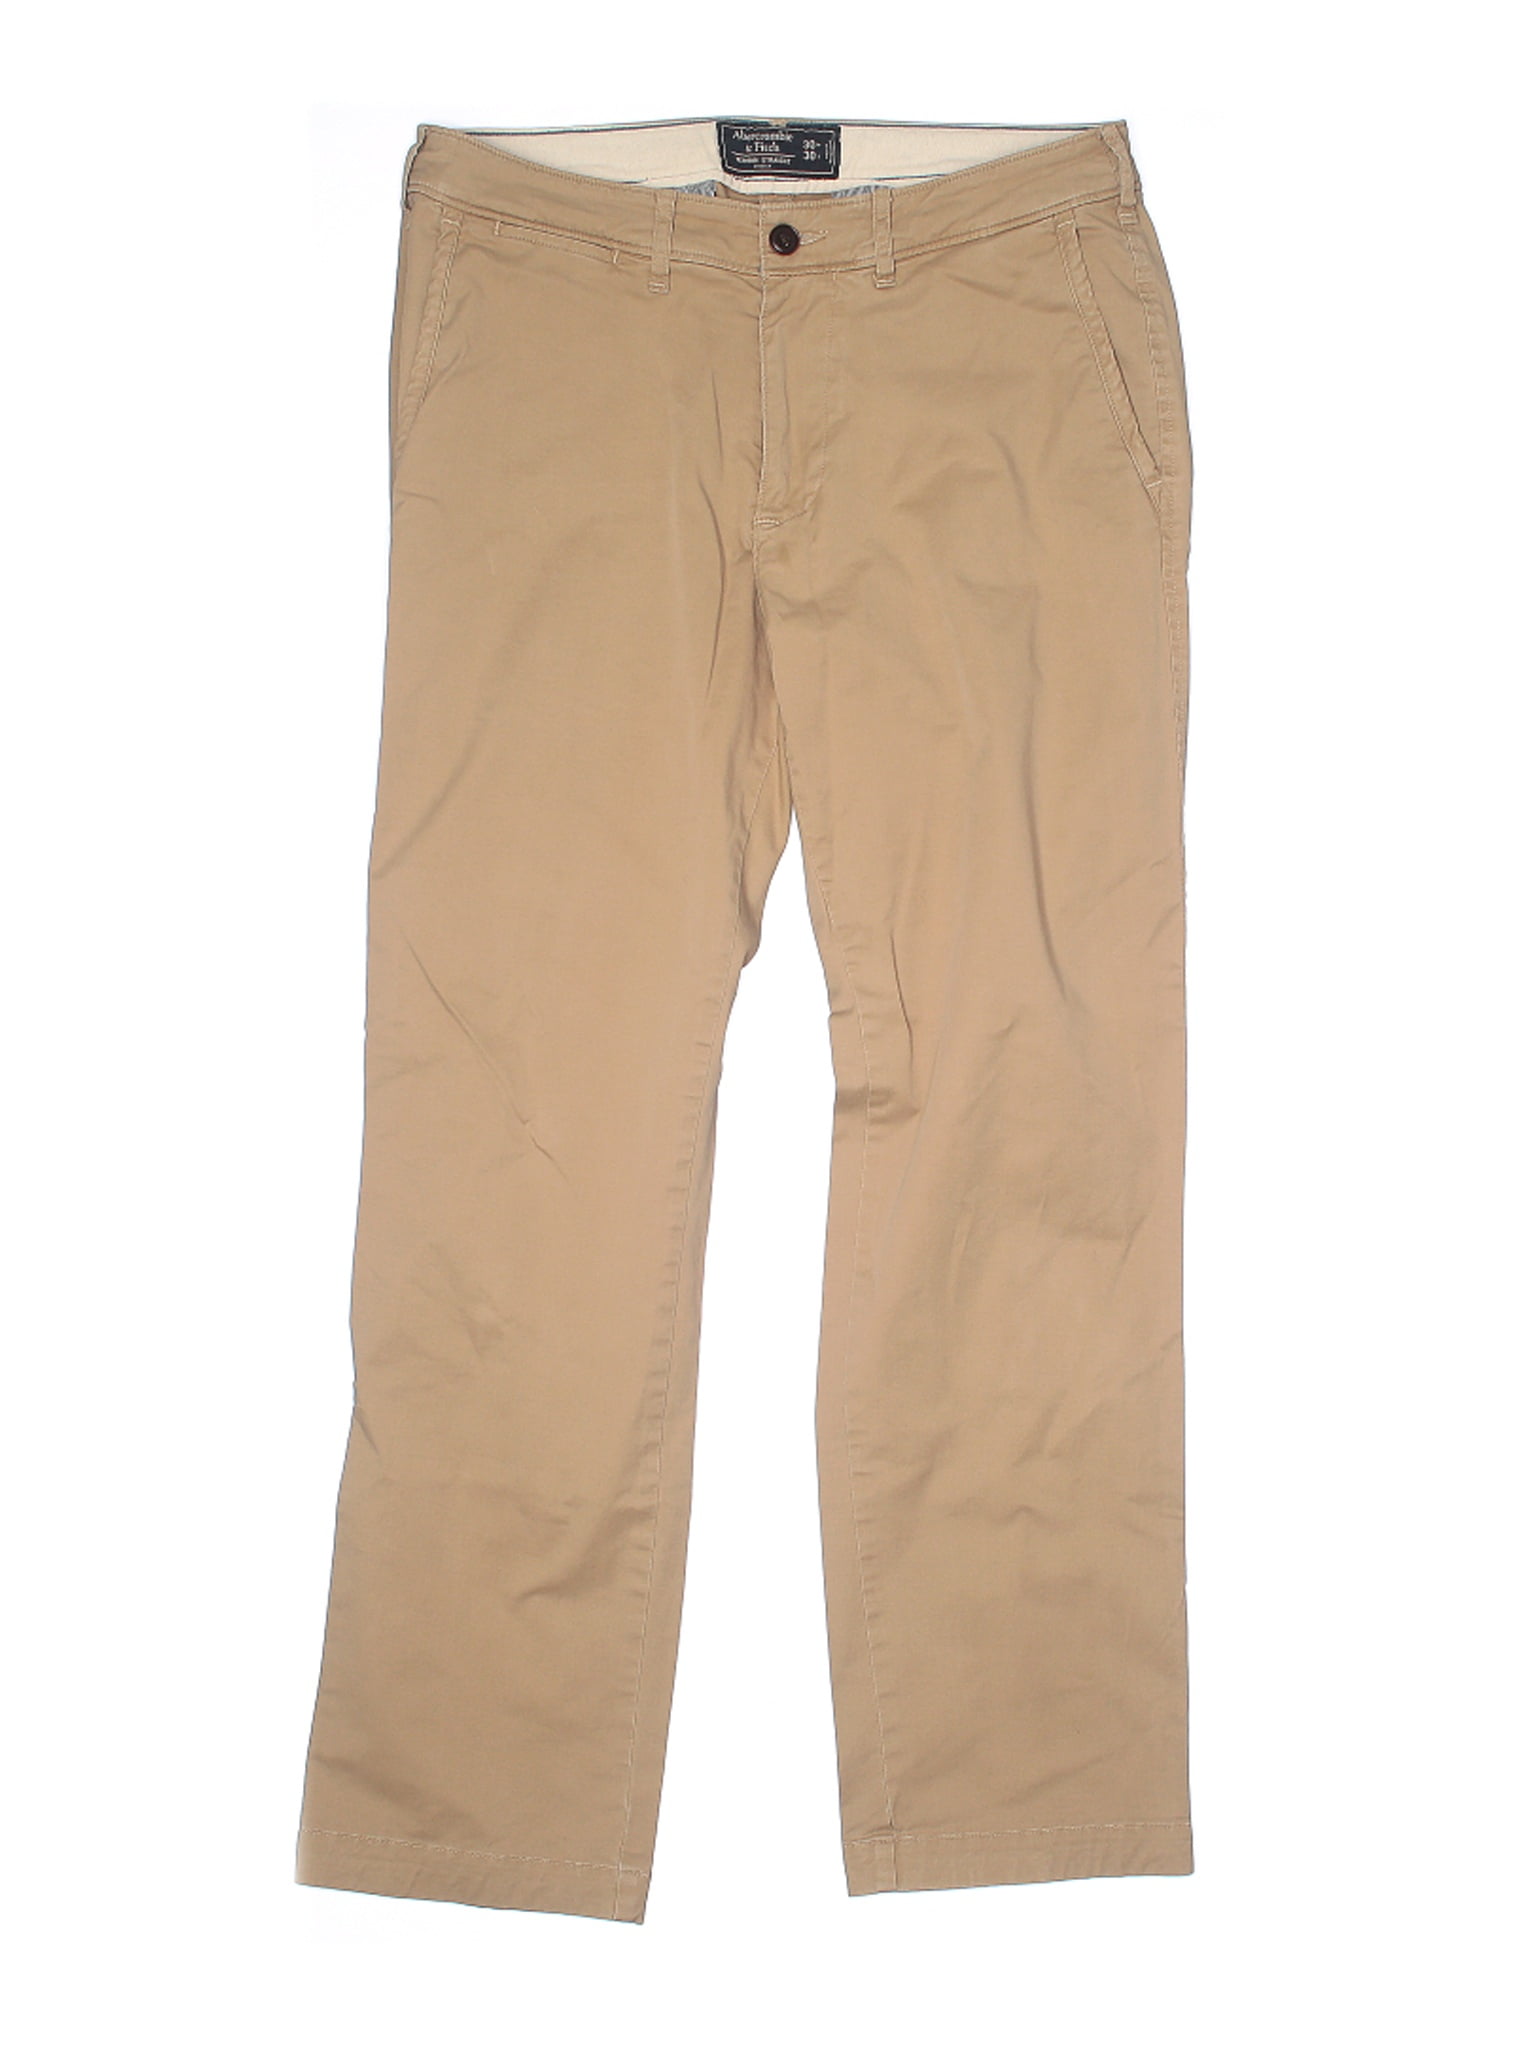 Abercrombie \u0026 Fitch - Pre-Owned 